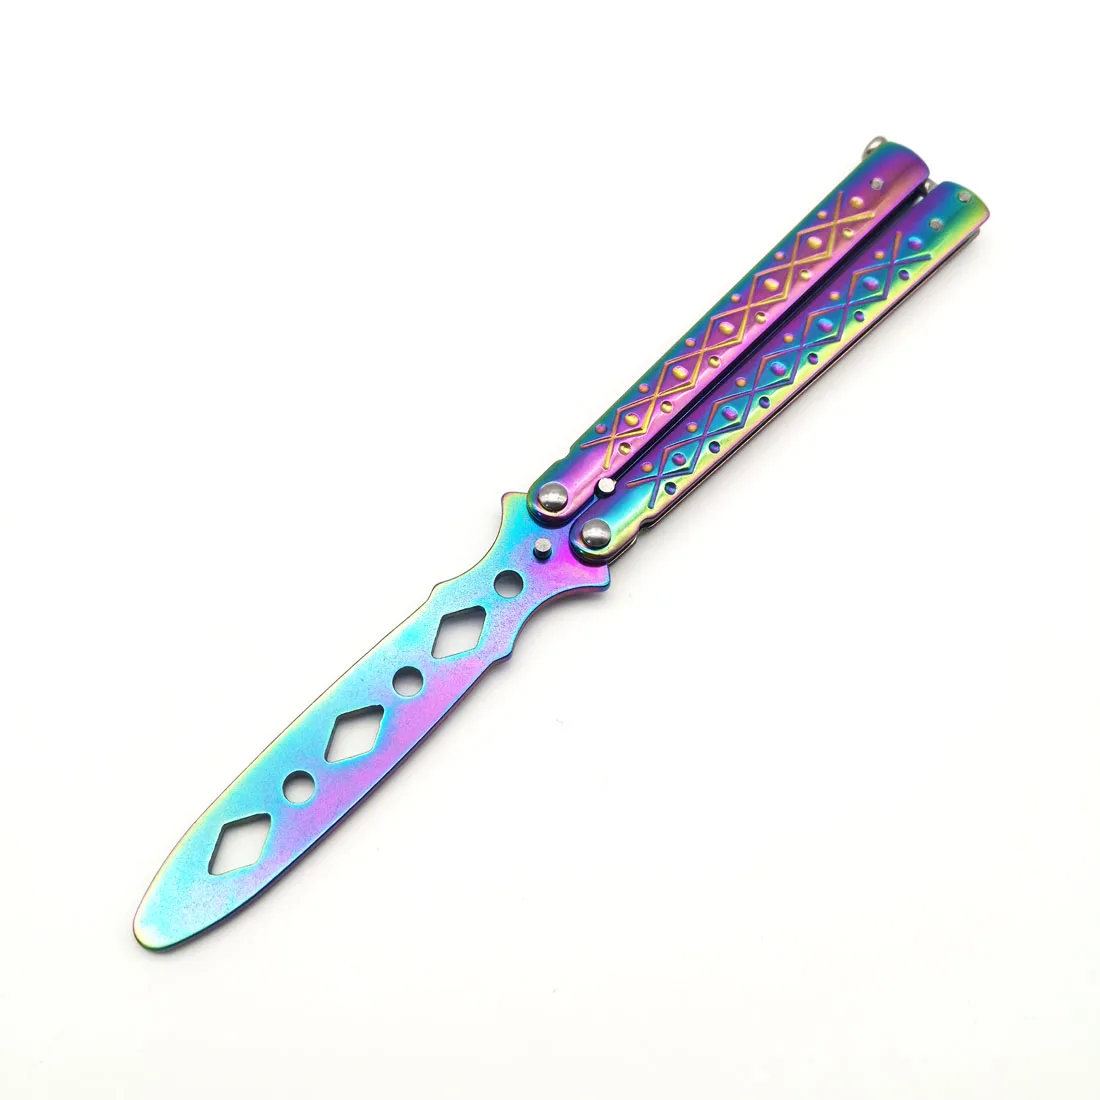 Butterfly knife with black steel blade 9.5 cm